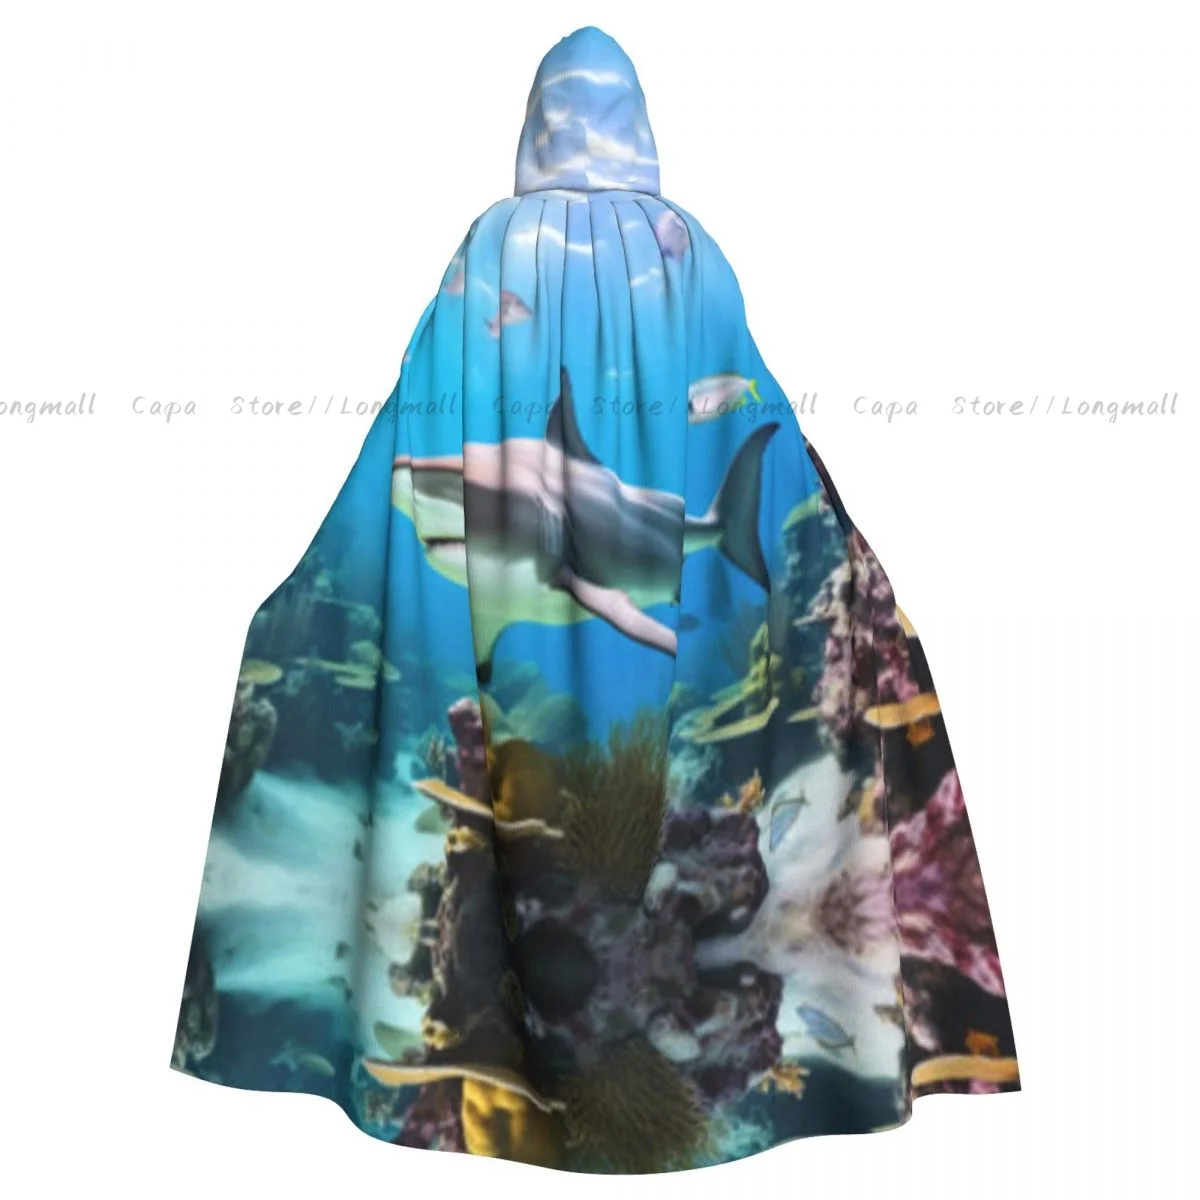 

Sharks In Coral Reefs Hooded Cloak Coat Halloween Cosplay Costume Vampire Devil Wizard Cape Gown Party